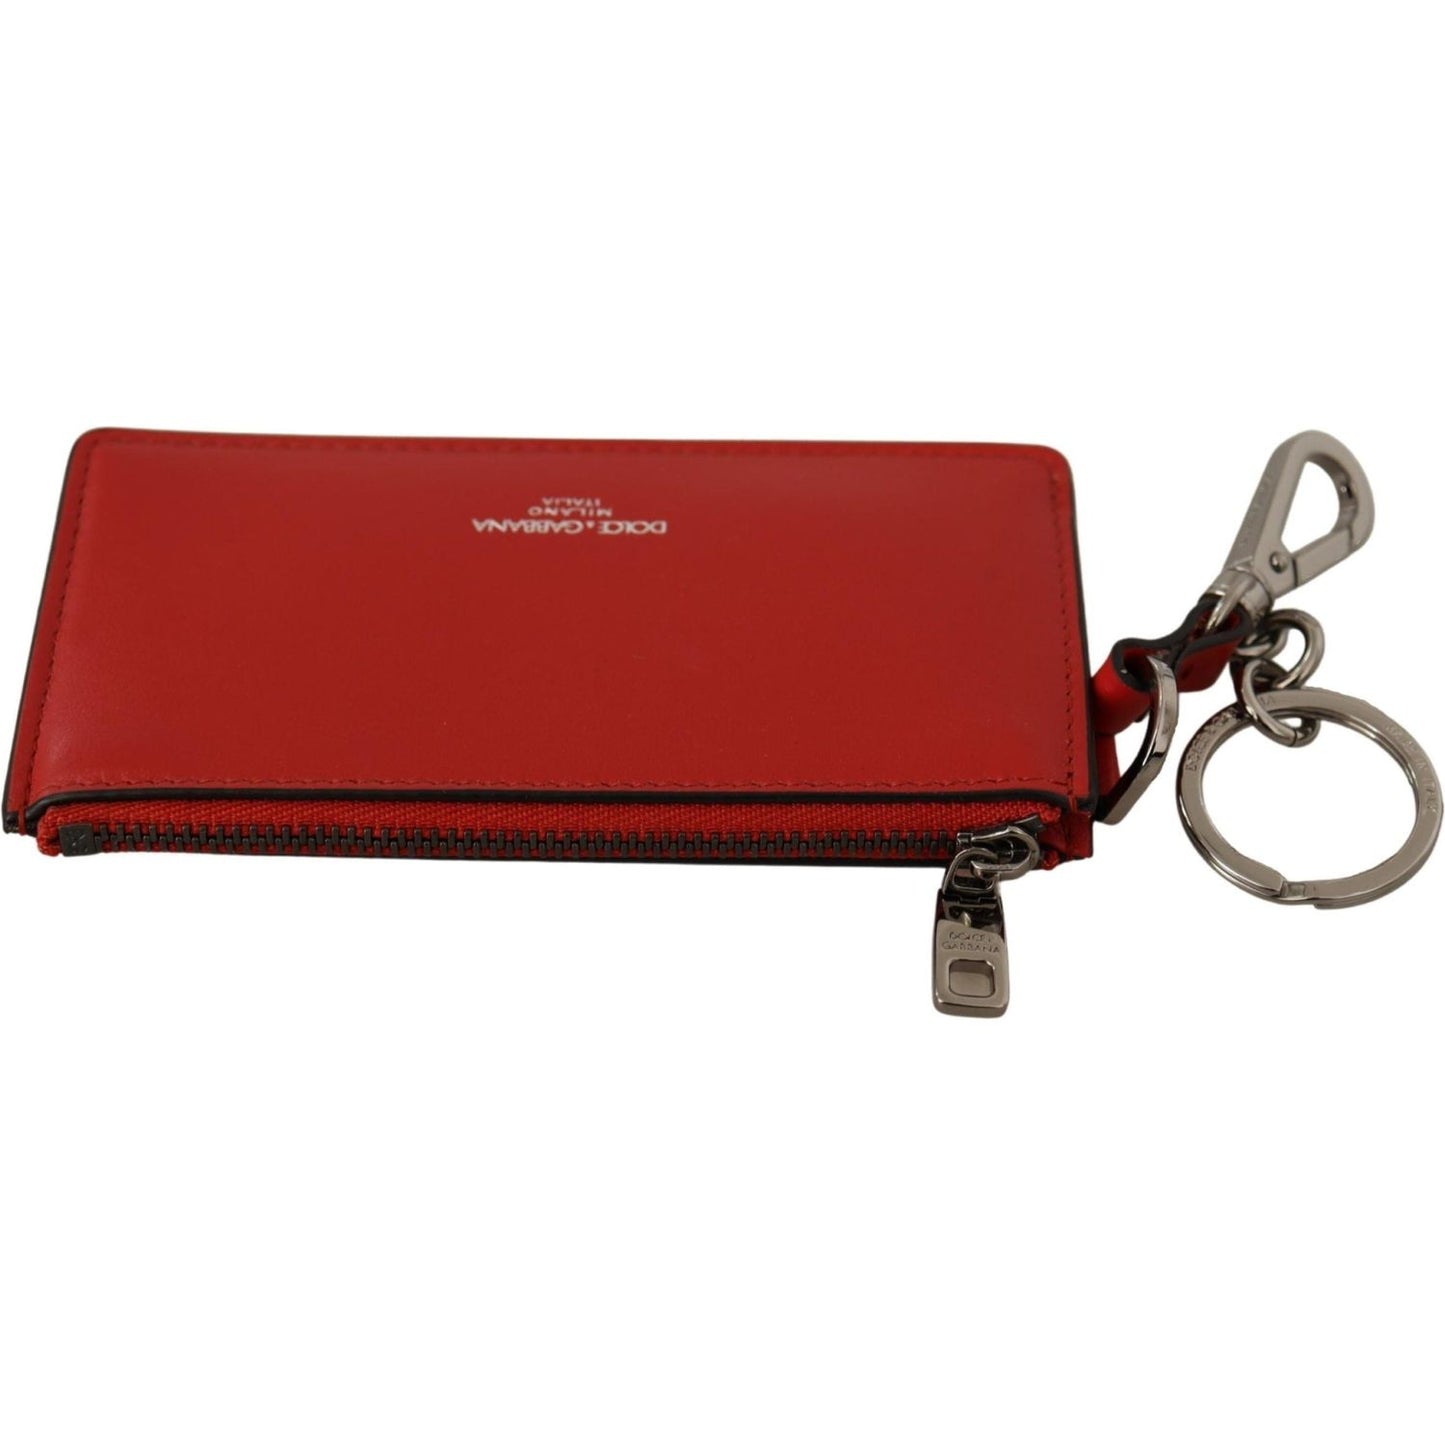 Dolce & Gabbana Elegant Leather Keychain in Vibrant Red red-leather-purse-silver-tone-keychain